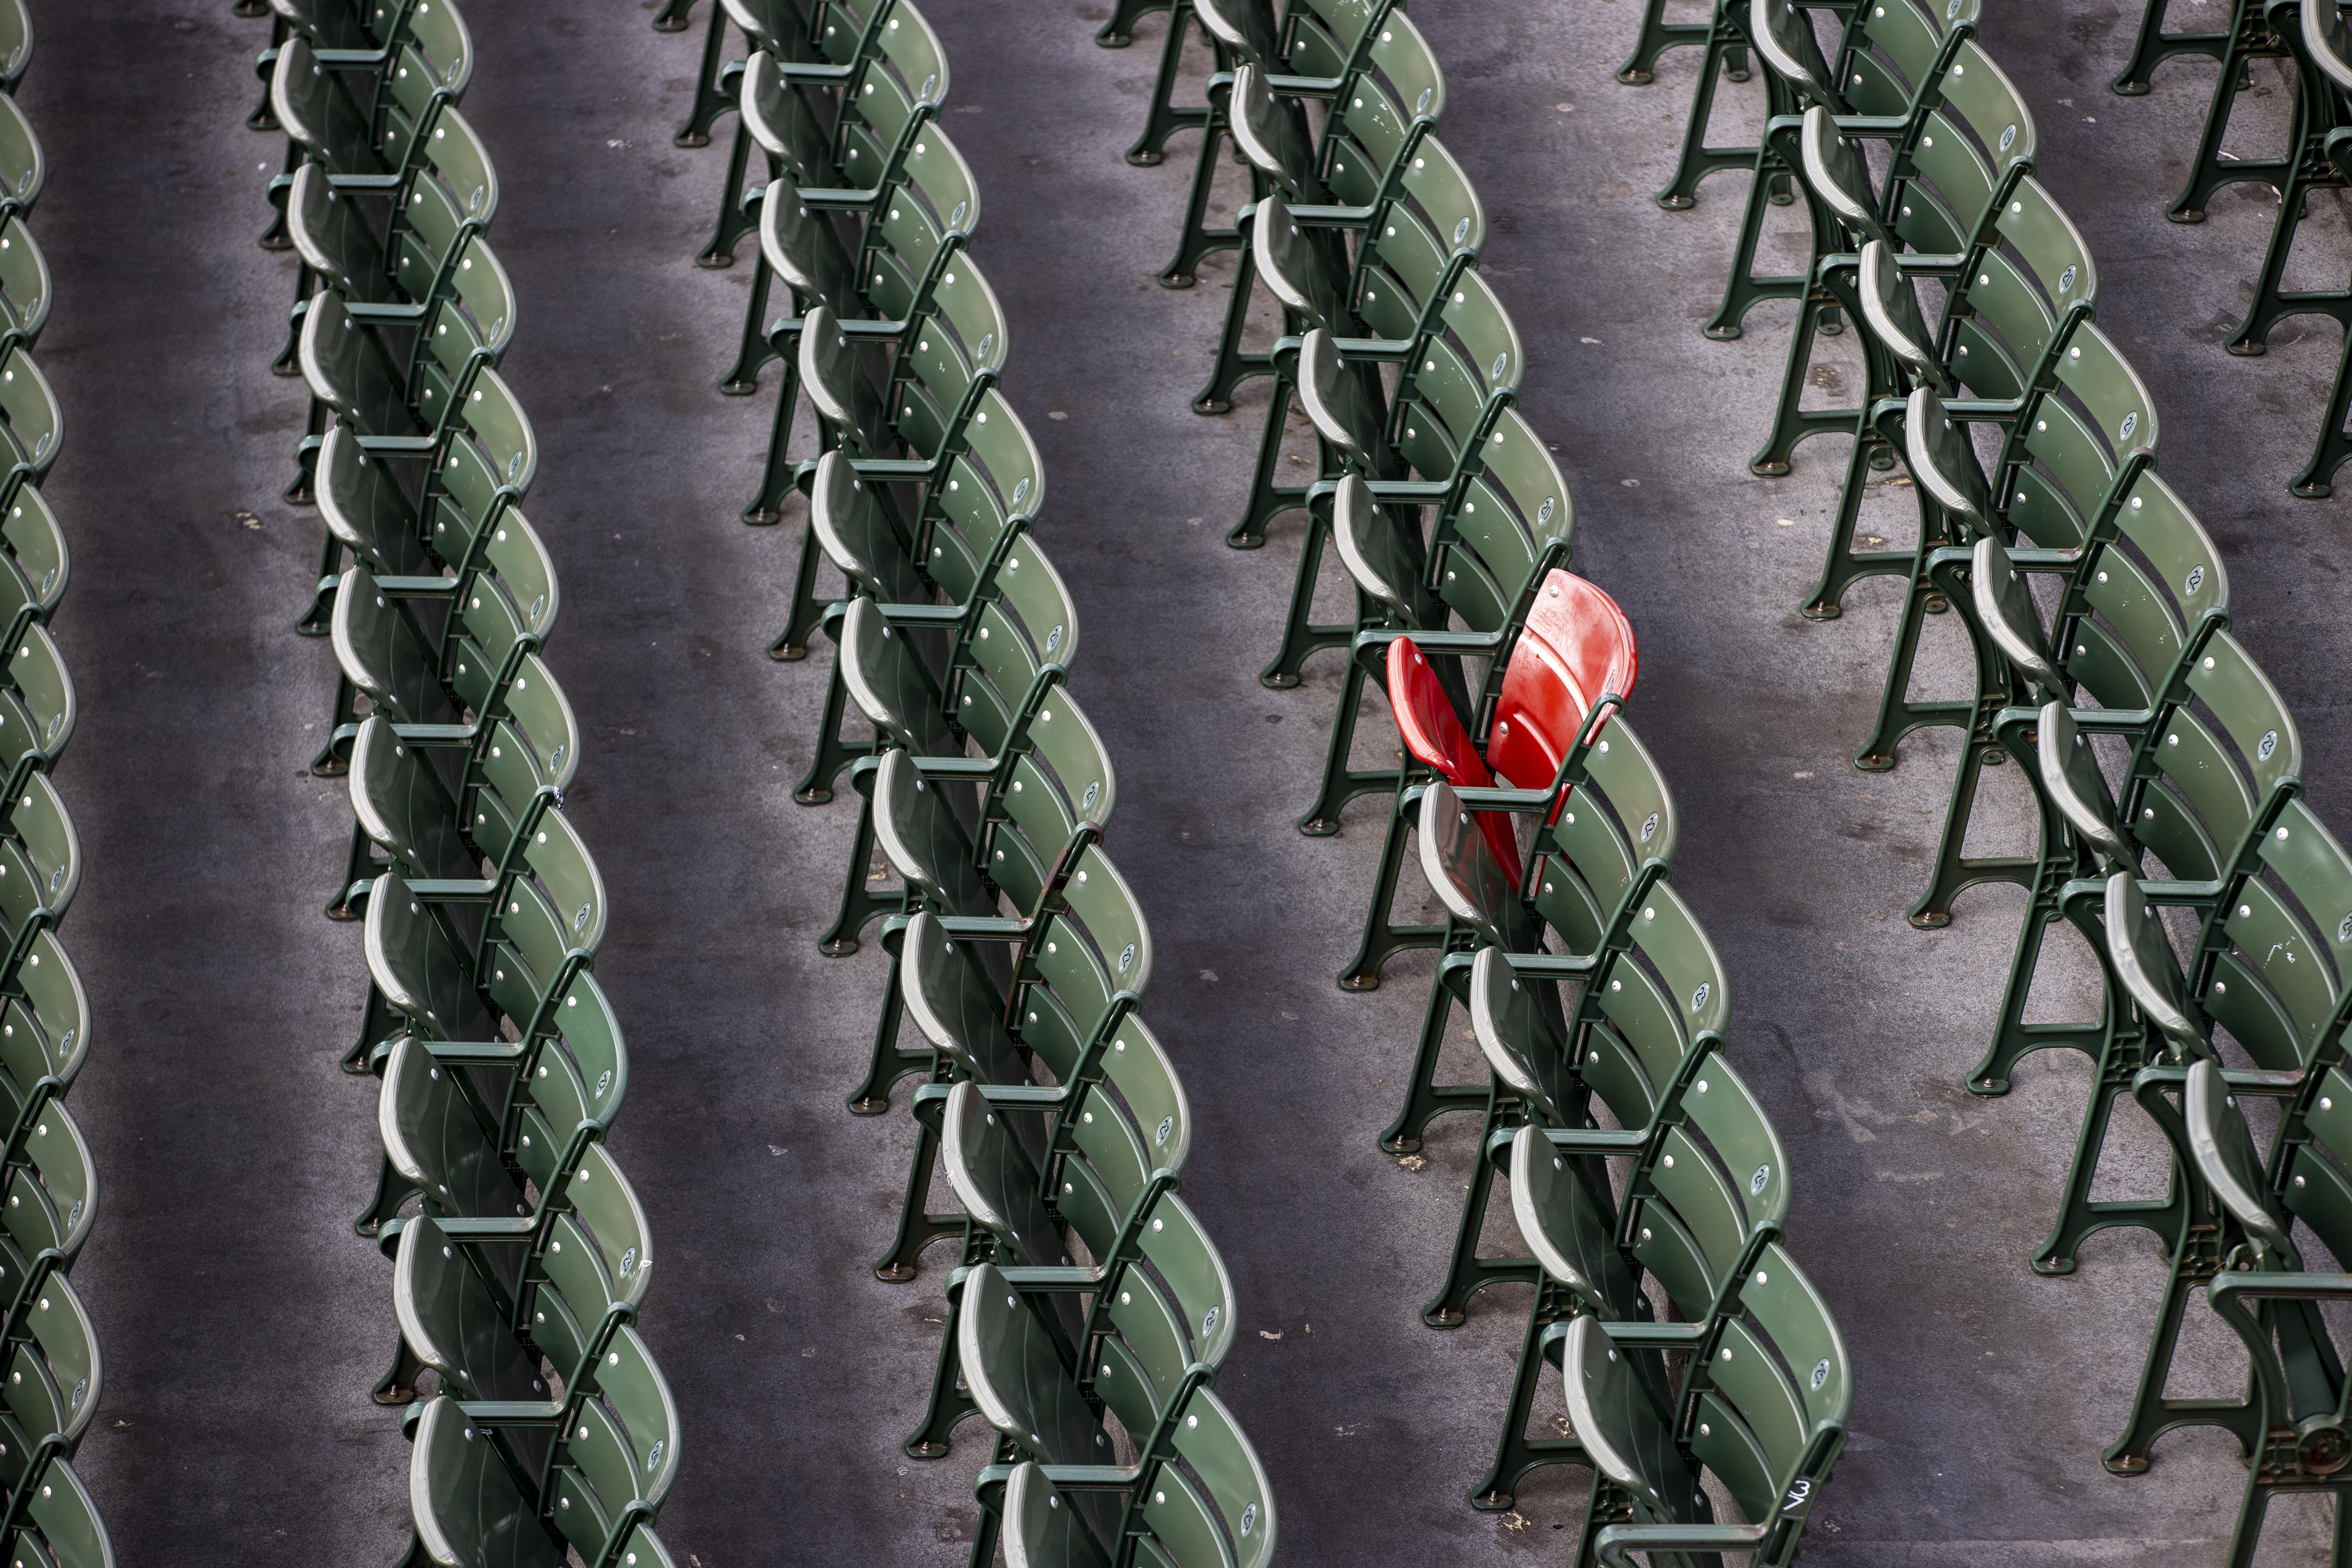 BOSTON, MA - APRIL 16: The red seat, which celebrates the longest home run hit in Fenway Park by Ted Williams, in the bleachers on April 16, 2020. Fenway Park in Boston remains closed during the coronavirus emergency. (Photo by Stan Grossfeld/The Boston G